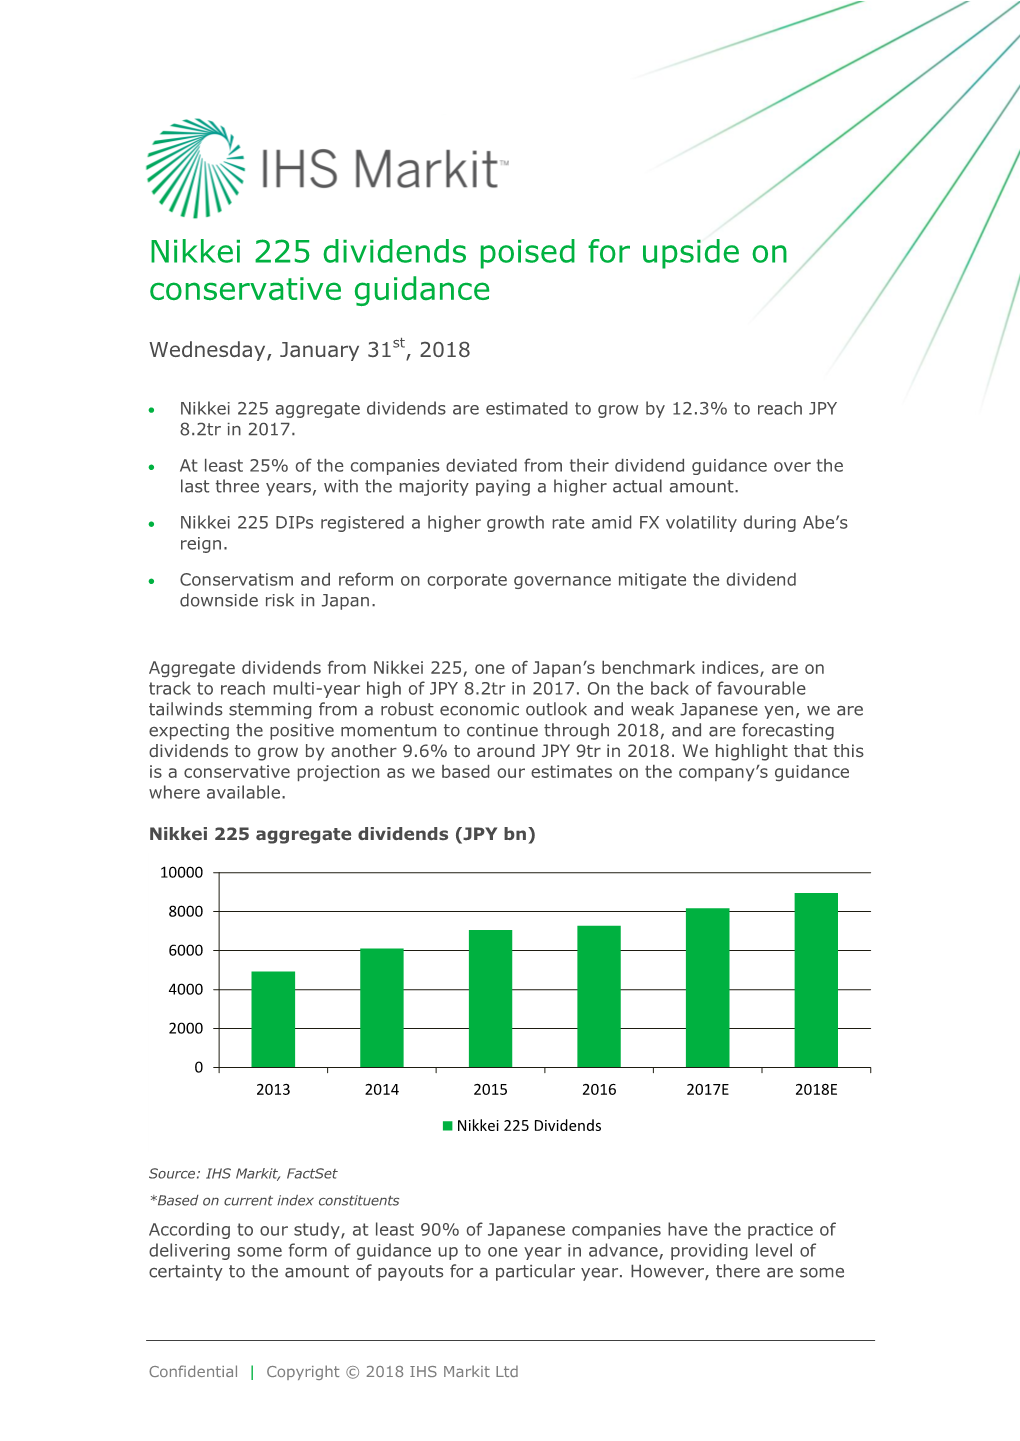 Nikkei 225 Dividends Poised for Upside on Conservative Guidance